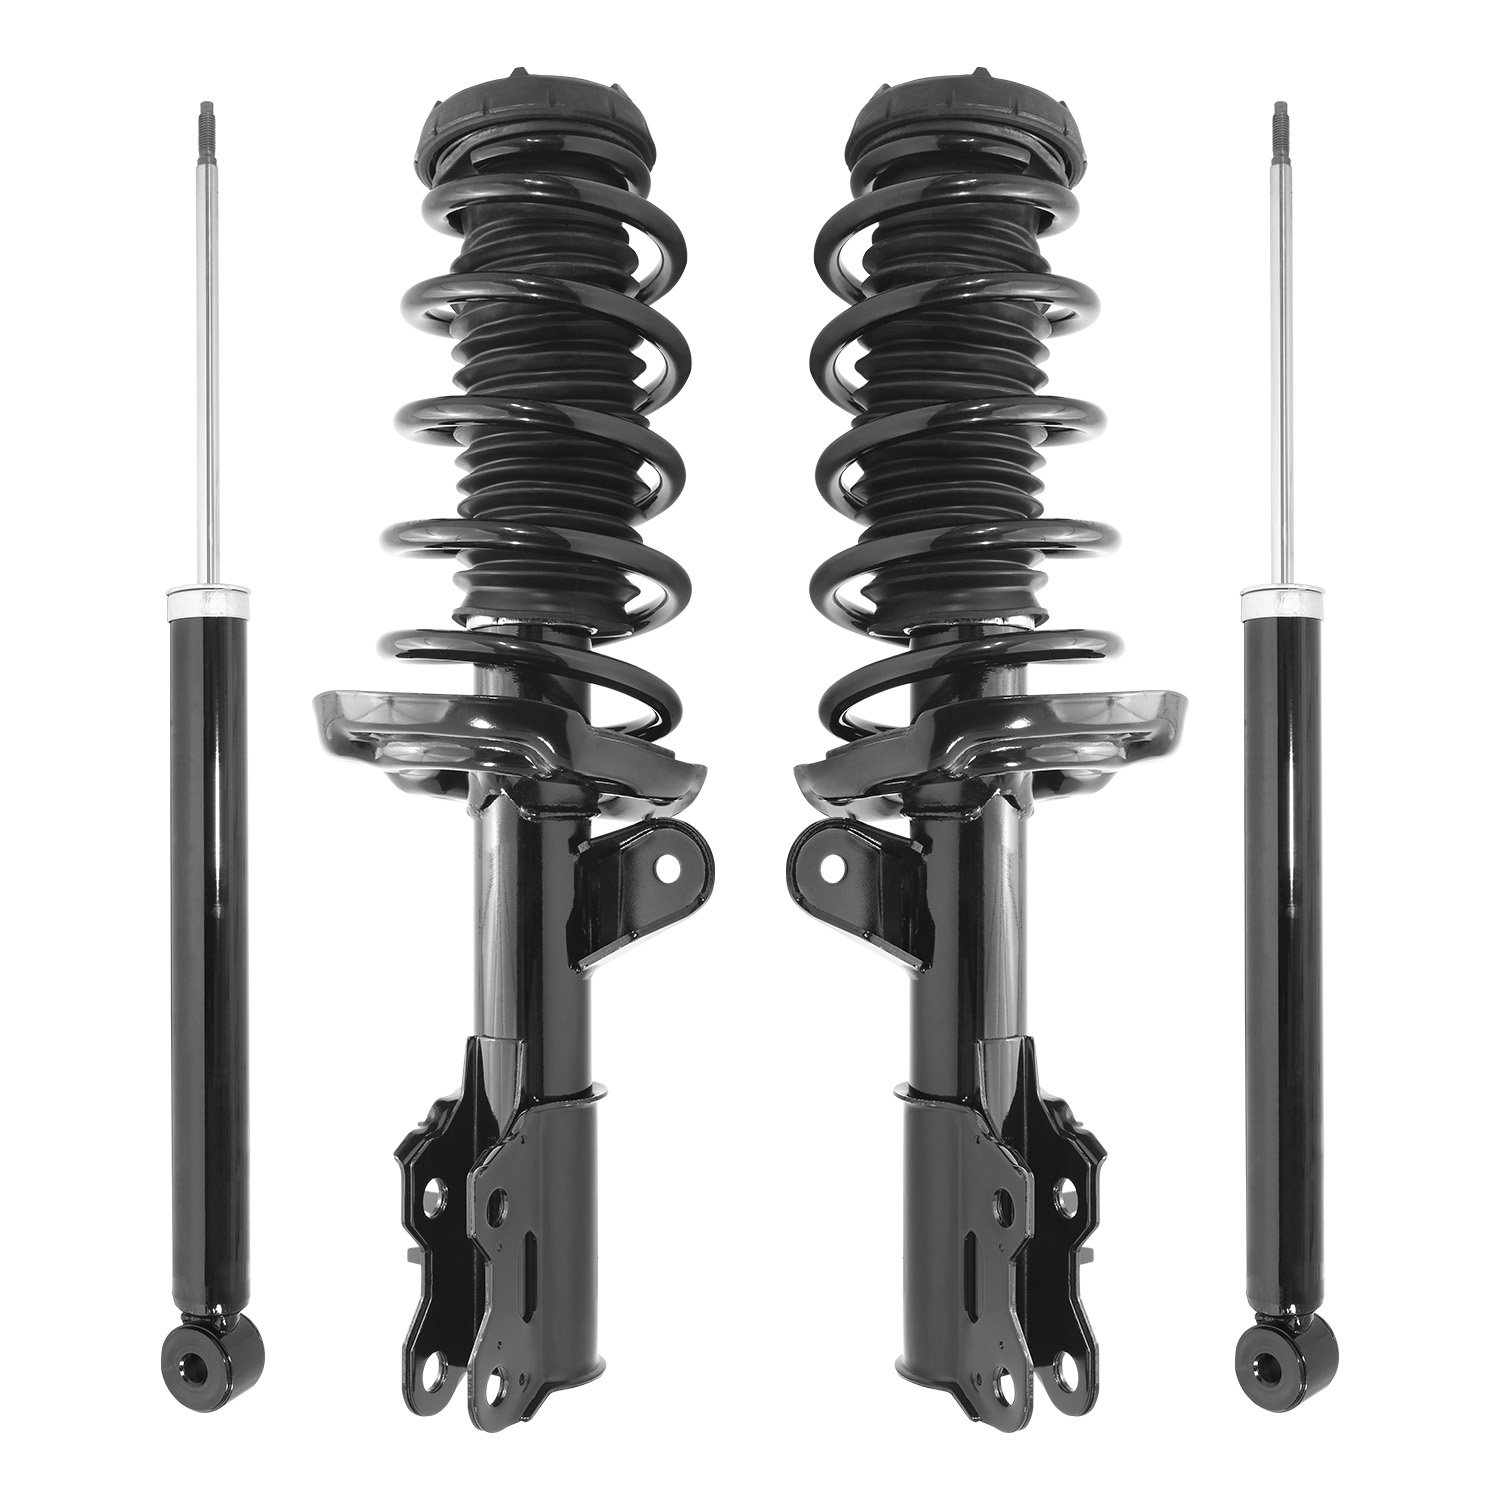 4-11717-251170-001 Front & Rear Suspension Strut & Coil Spring Assembly Fits Select Buick Encore, Chevy Trax